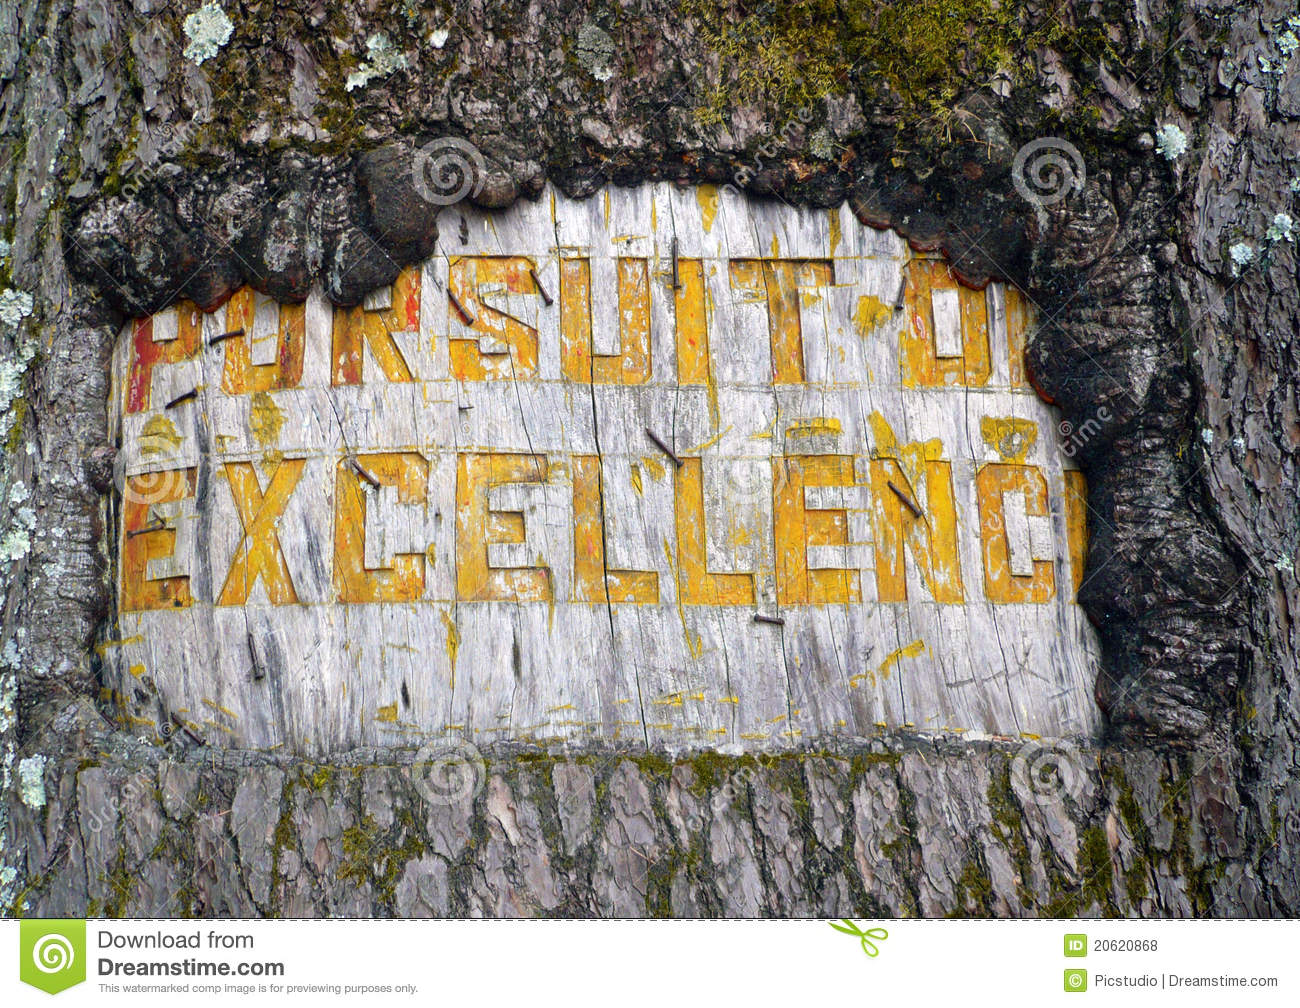 Pursuit Of Excellence Royalty Free Stock Photos   Image  20620868